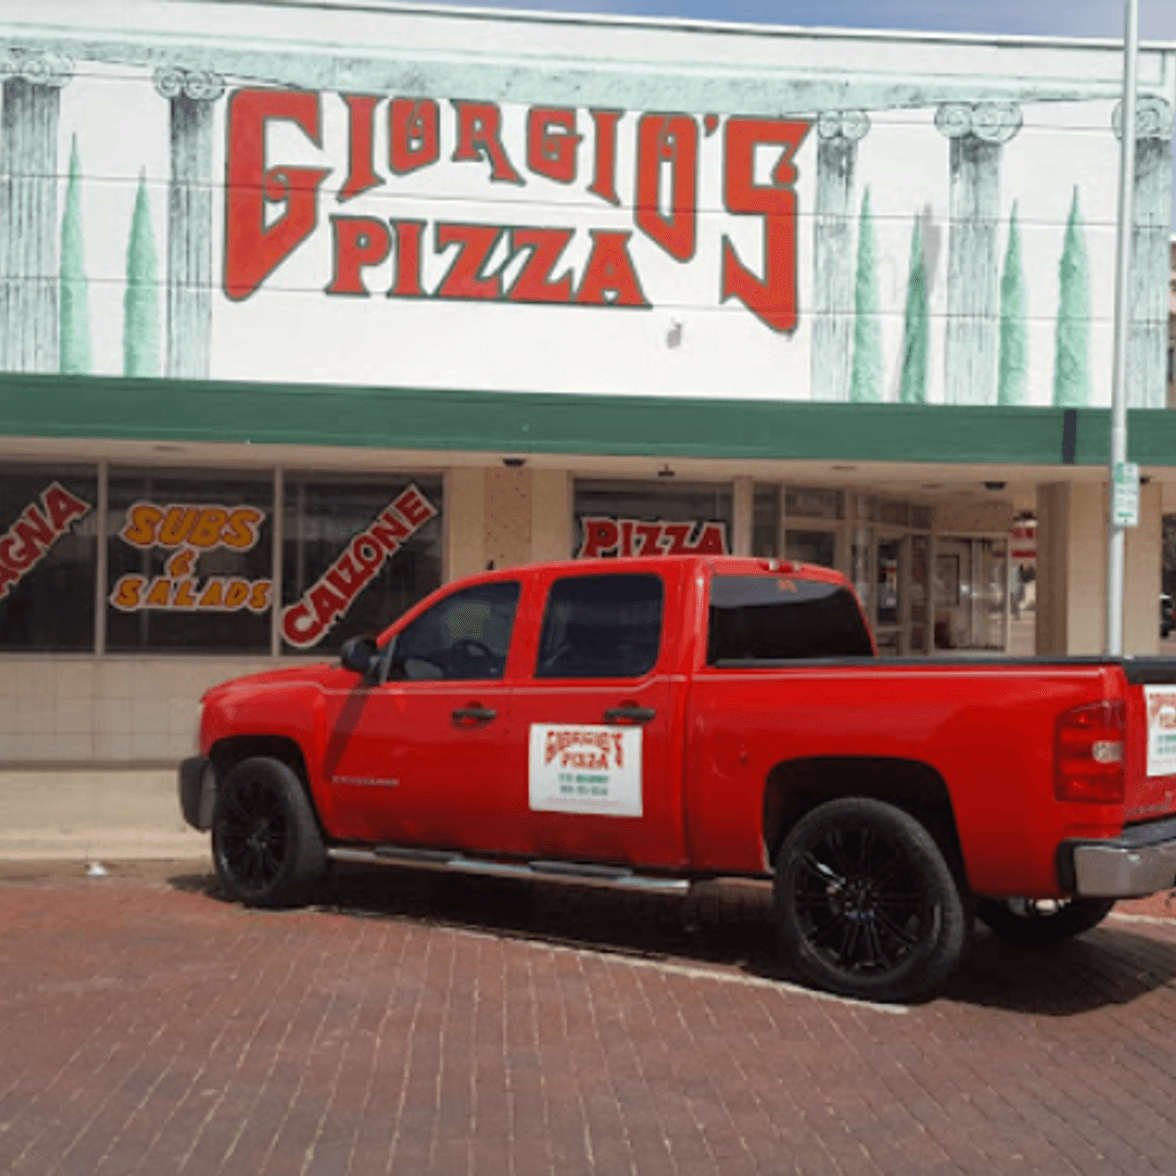 Giorgio's Pizza: A Timeless Culinary Institution in Lubbock, TX for 31 Years